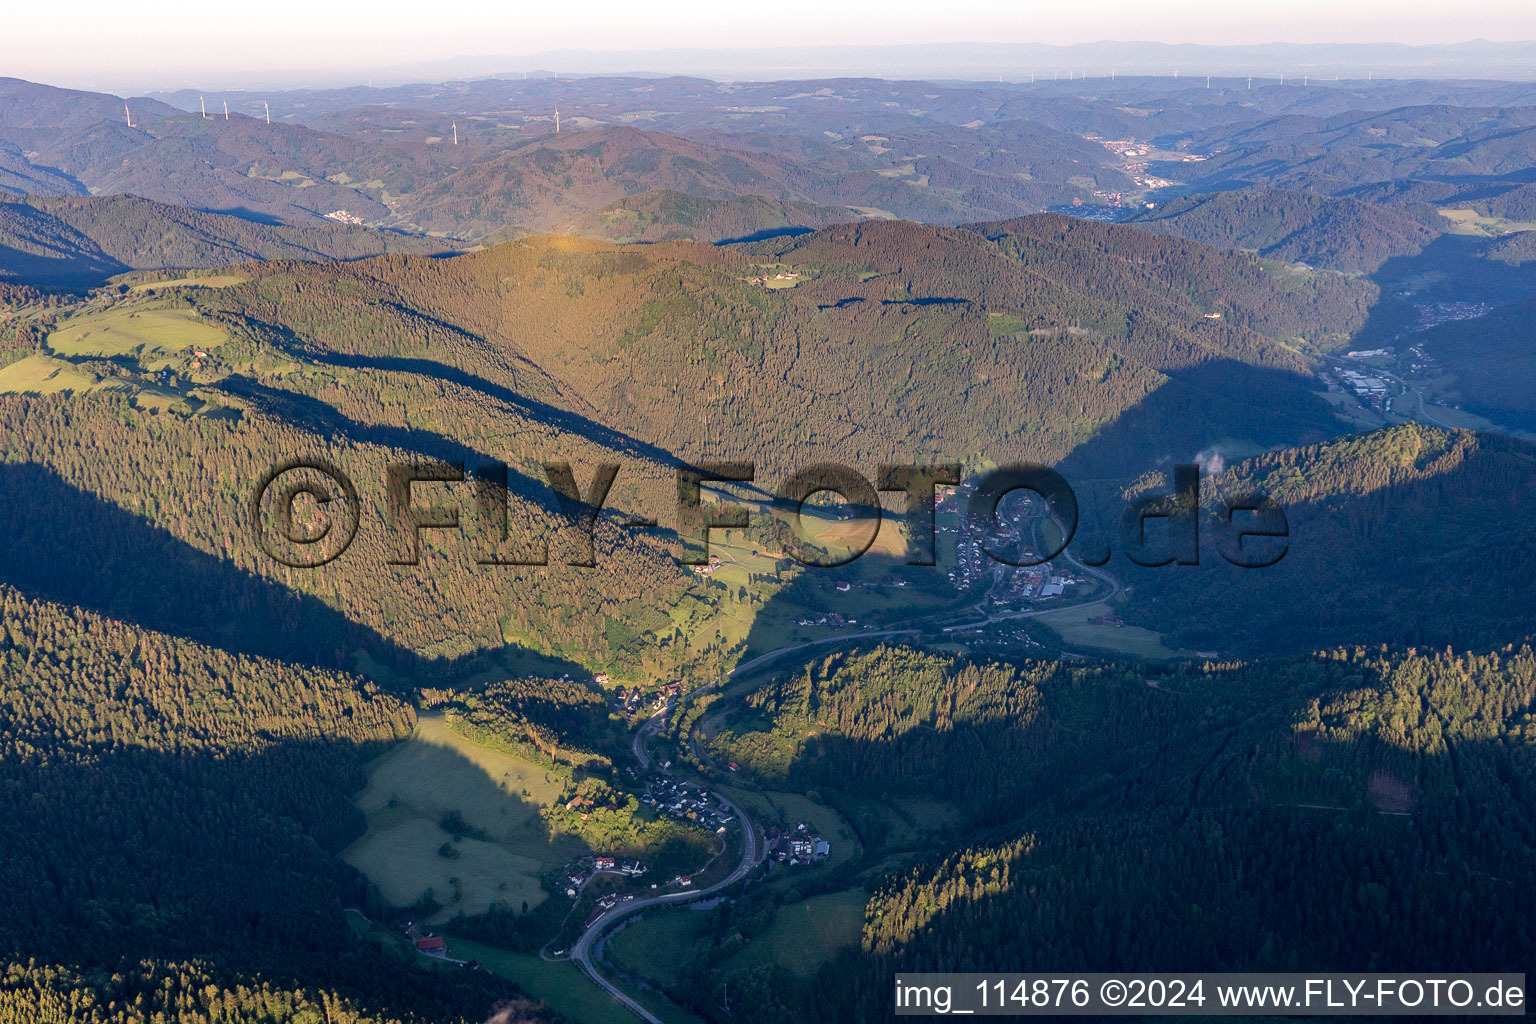 Black-forest valley landscape surrounded by mountains in the district Kinzigtal in Wolfach in the state Baden-Wurttemberg, Germany